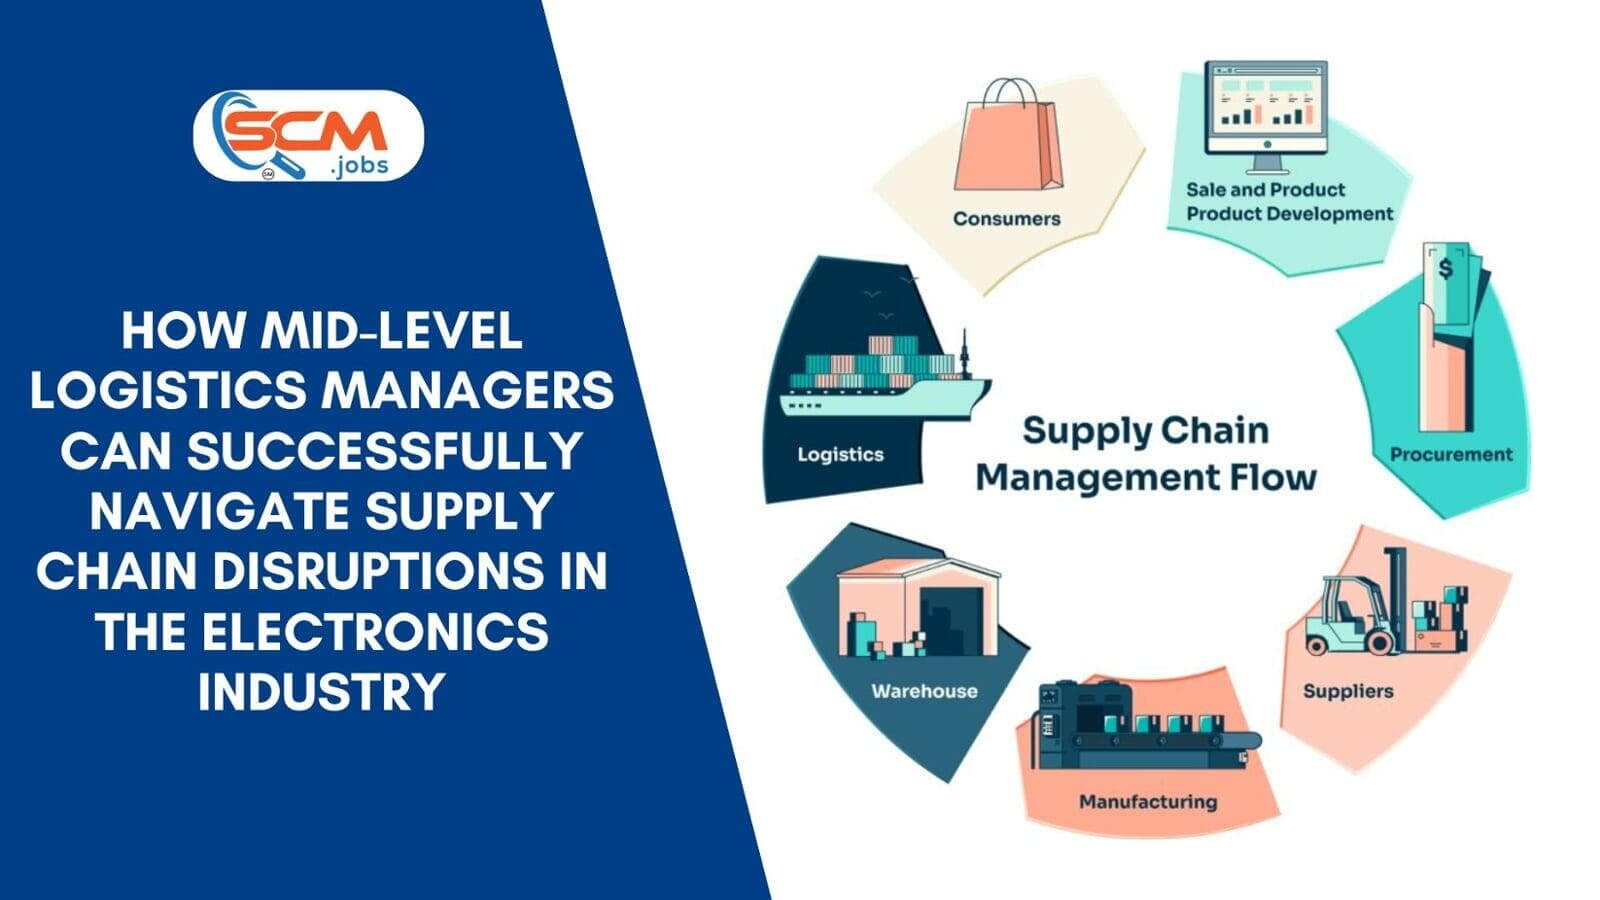 How Mid-Level Logistics Managers Can Successfully Navigate Supply Chain Disruptions in the Electronics Industry